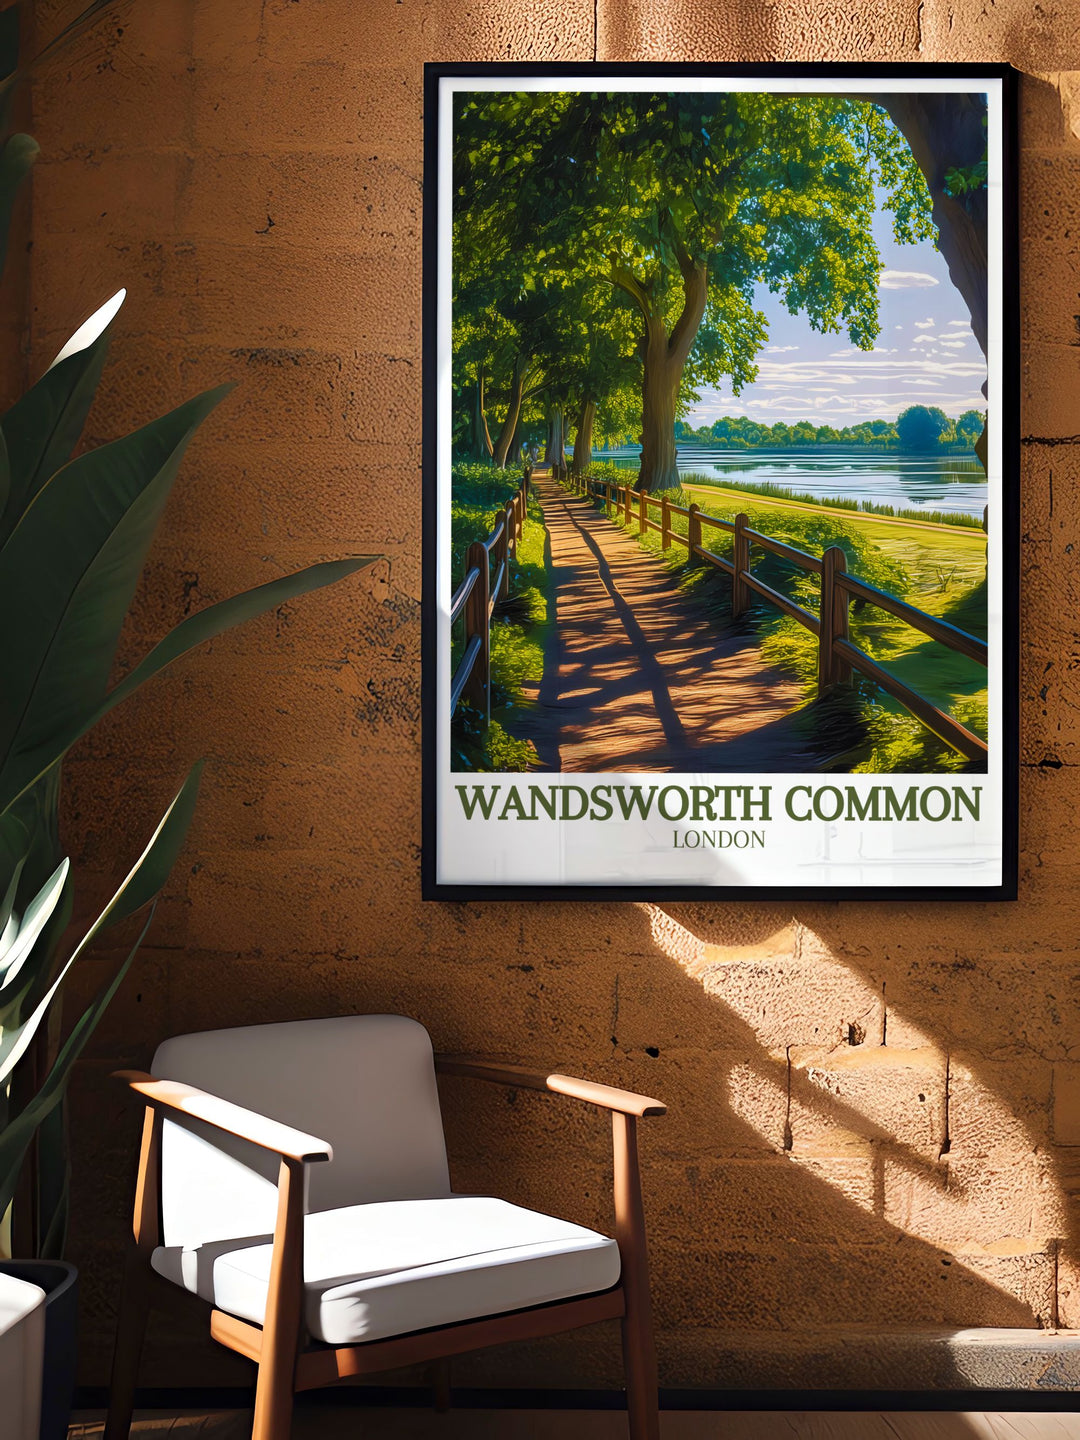 Celebrate the beauty of Wandsworth Common with this retro railway print. The poster highlights the unique blend of history and nature found in Wandsworth Park, perfect for anyone who loves South London.